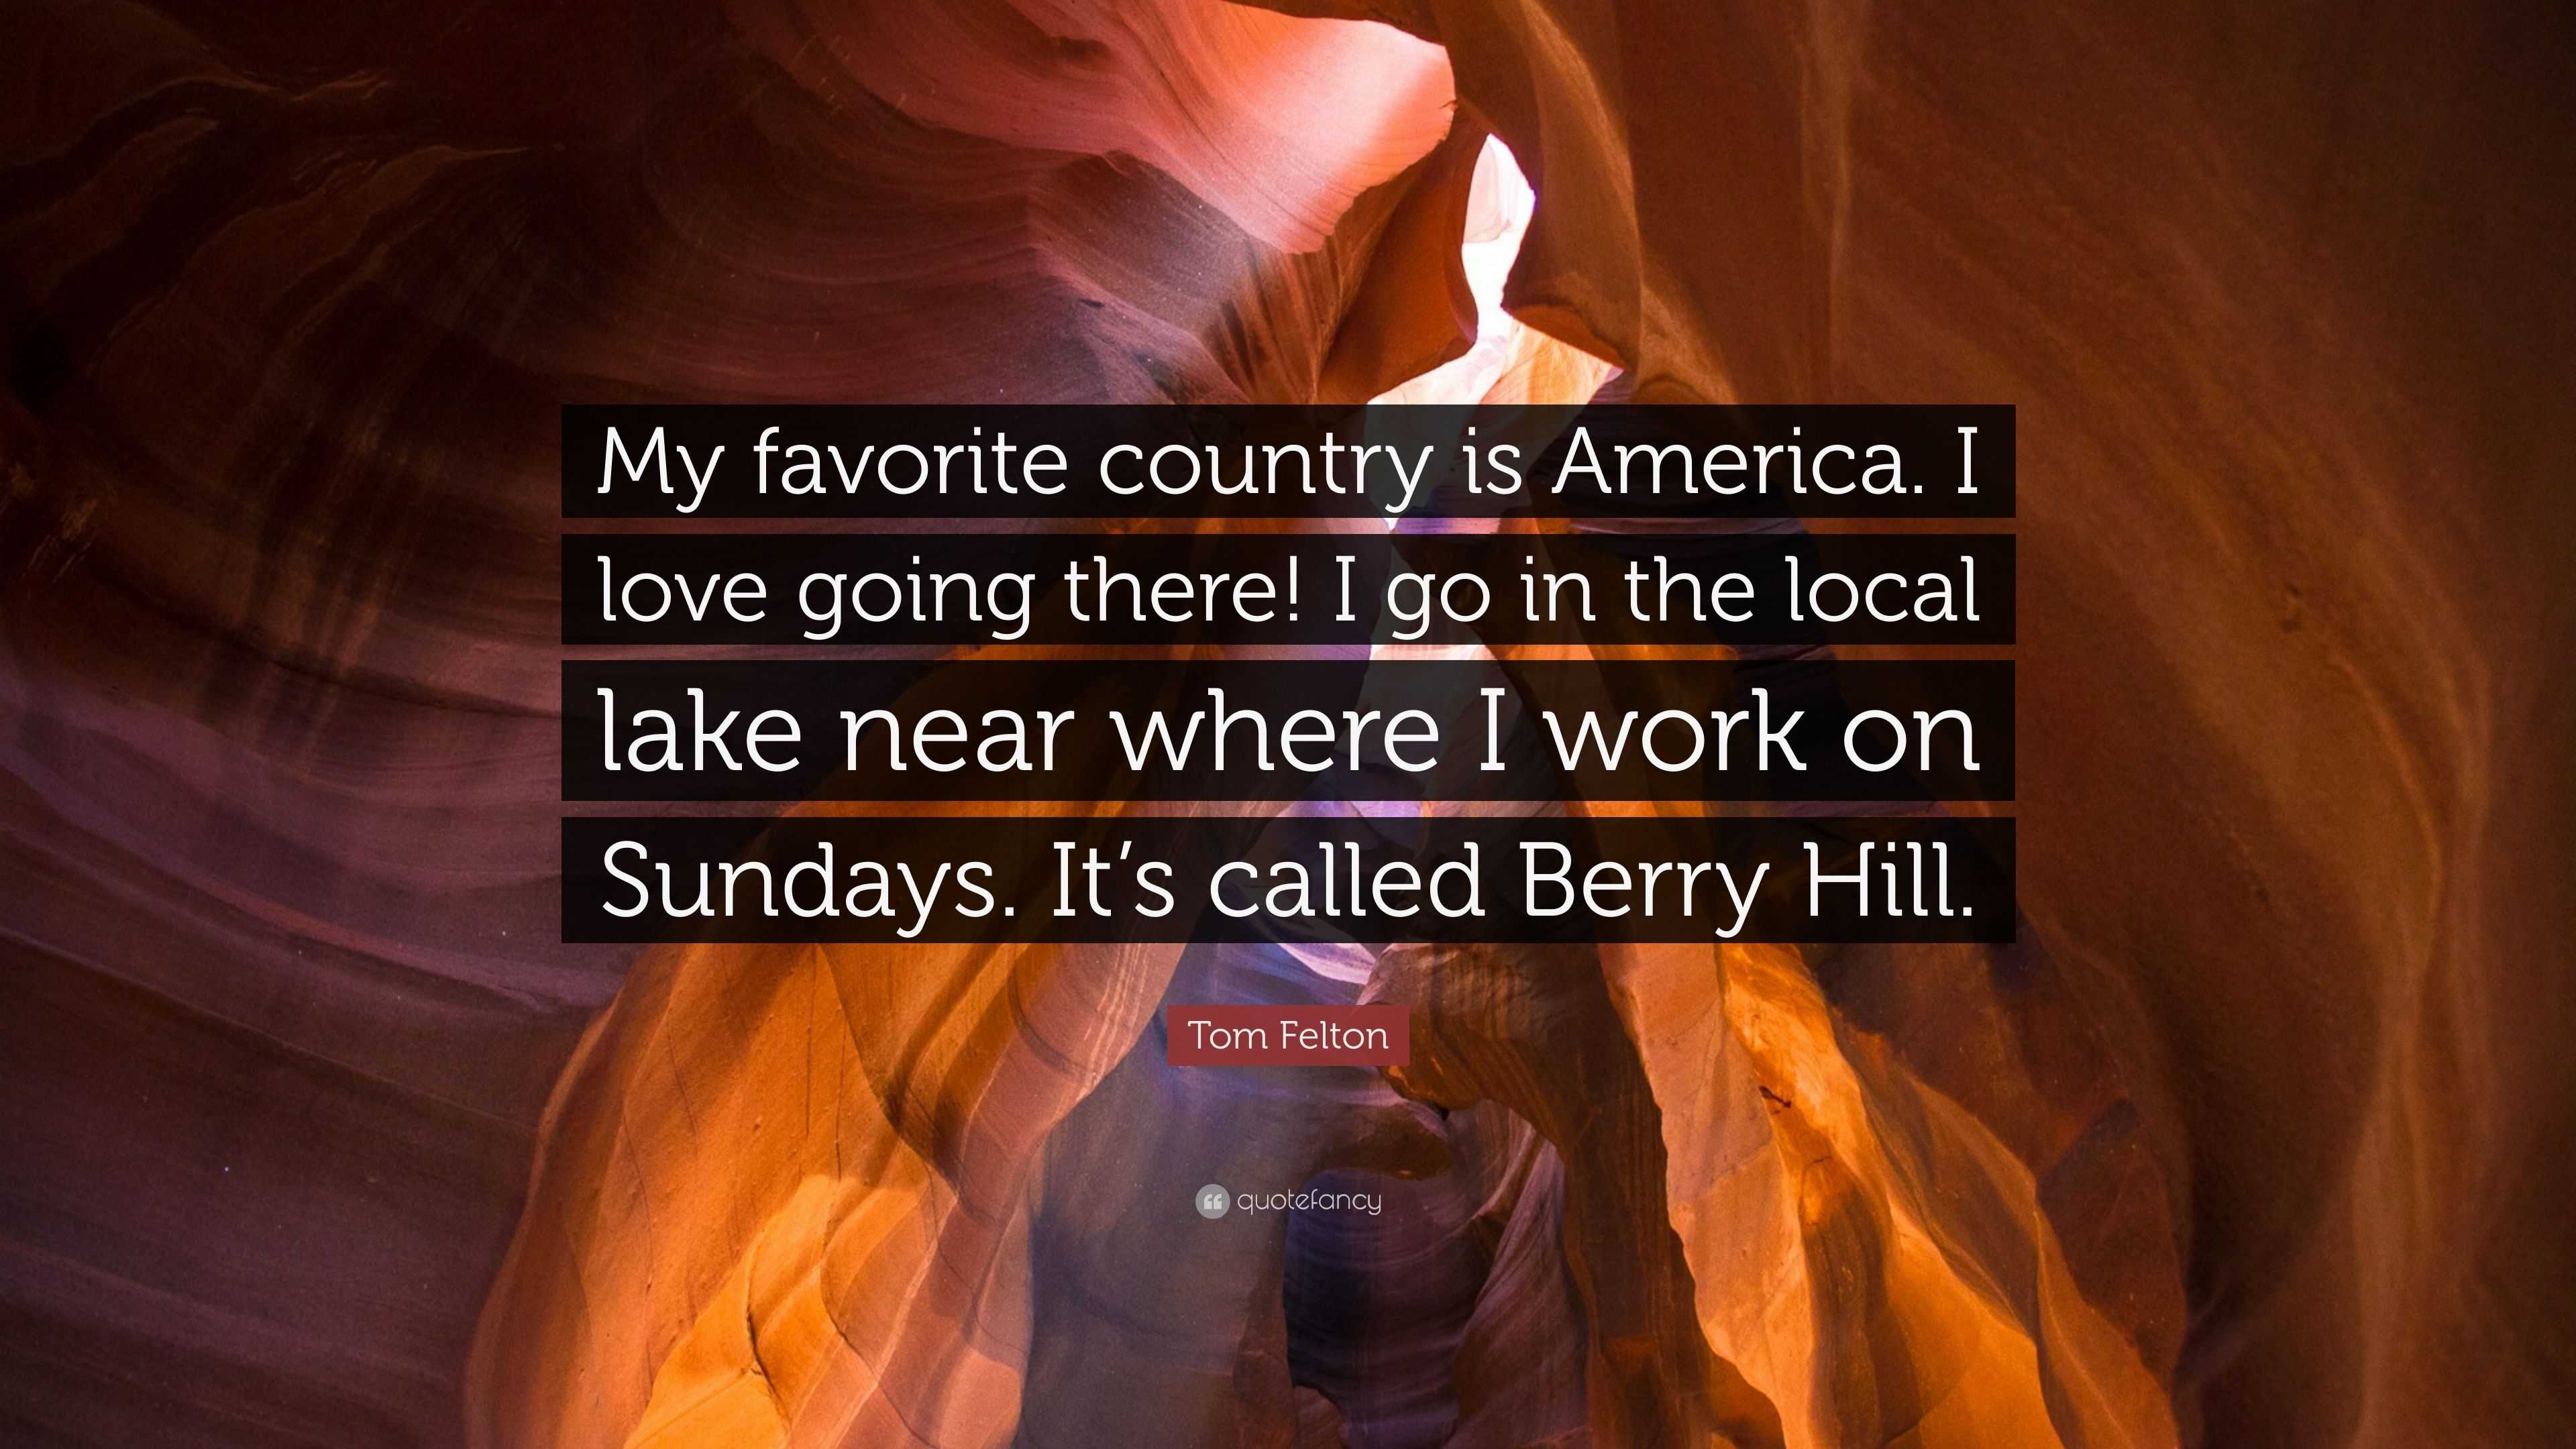 https://quotefancy.com/media/wallpaper/3840x2160/6106317-Tom-Felton-Quote-My-favorite-country-is-America-I-love-going-there.jpg